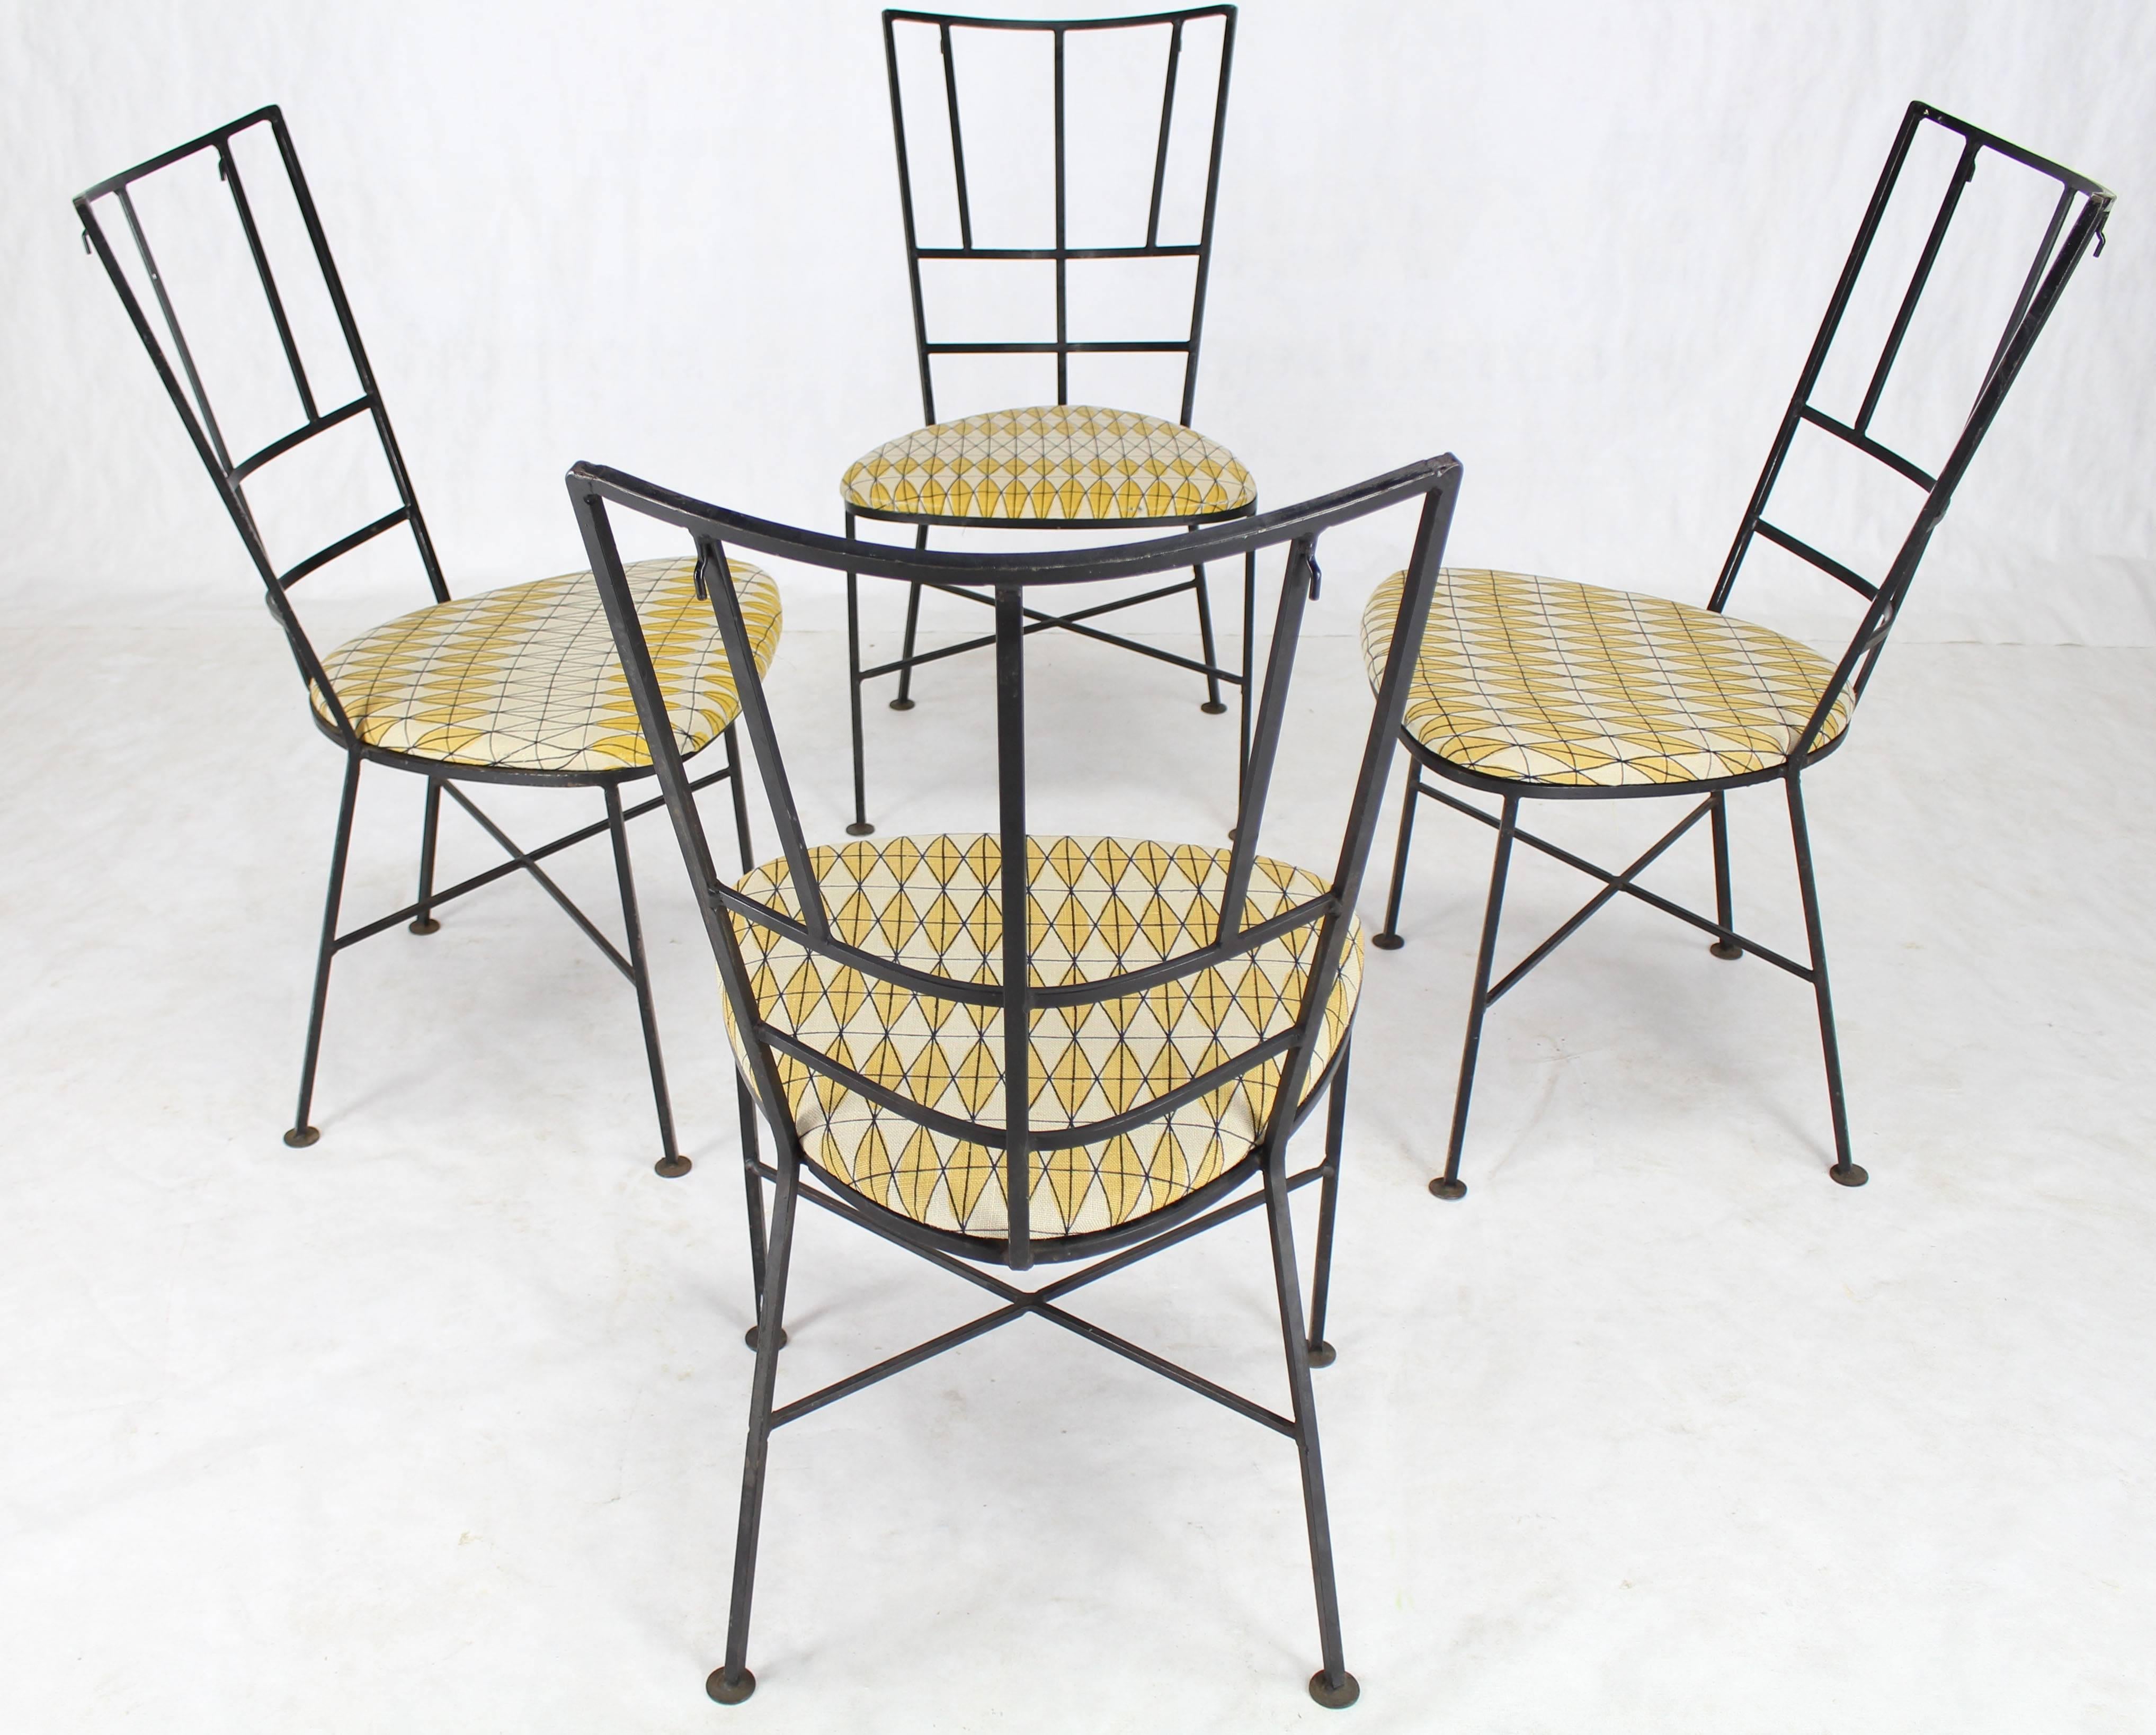 Set of Four Wrought Iron Outdoor Chairs Heart Shape Seats 1